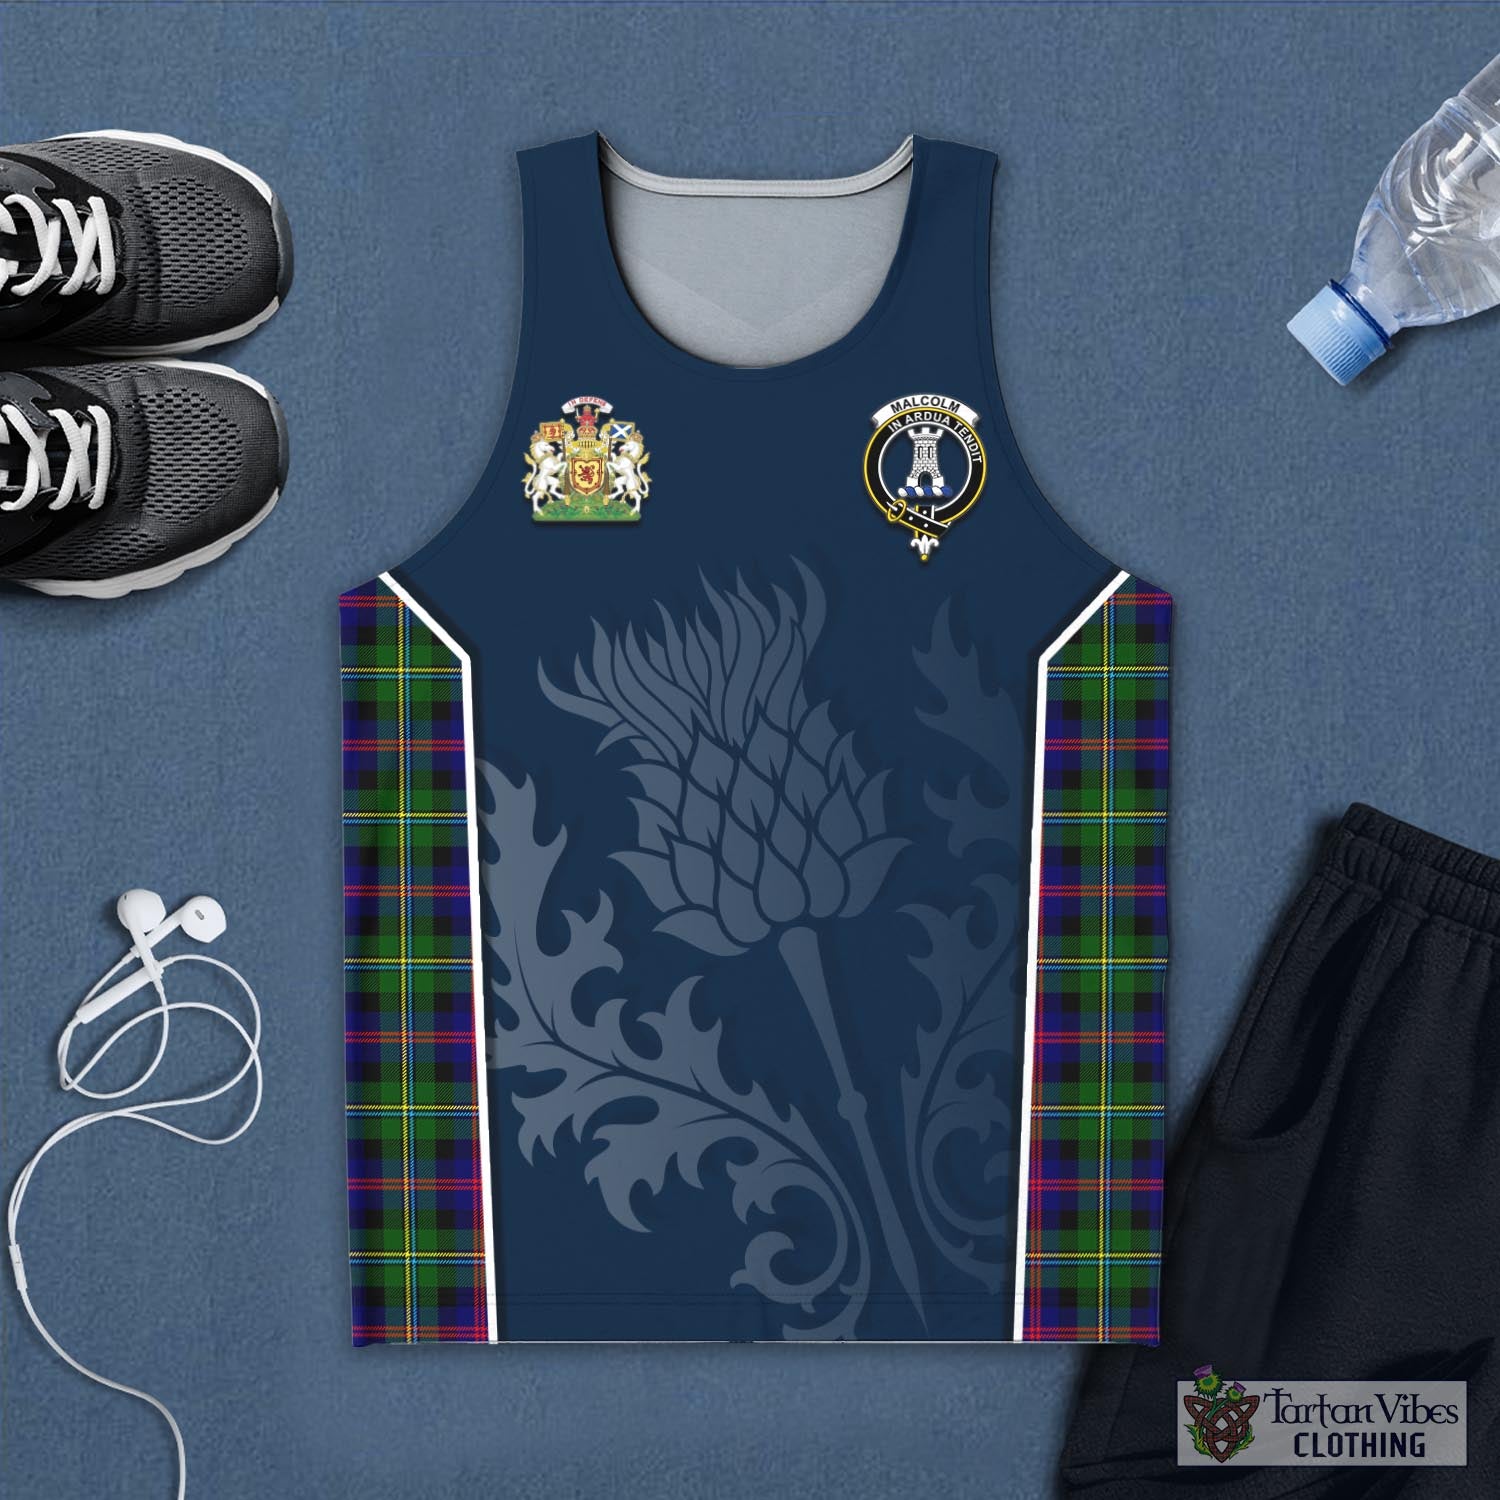 Tartan Vibes Clothing Malcolm Tartan Men's Tanks Top with Family Crest and Scottish Thistle Vibes Sport Style